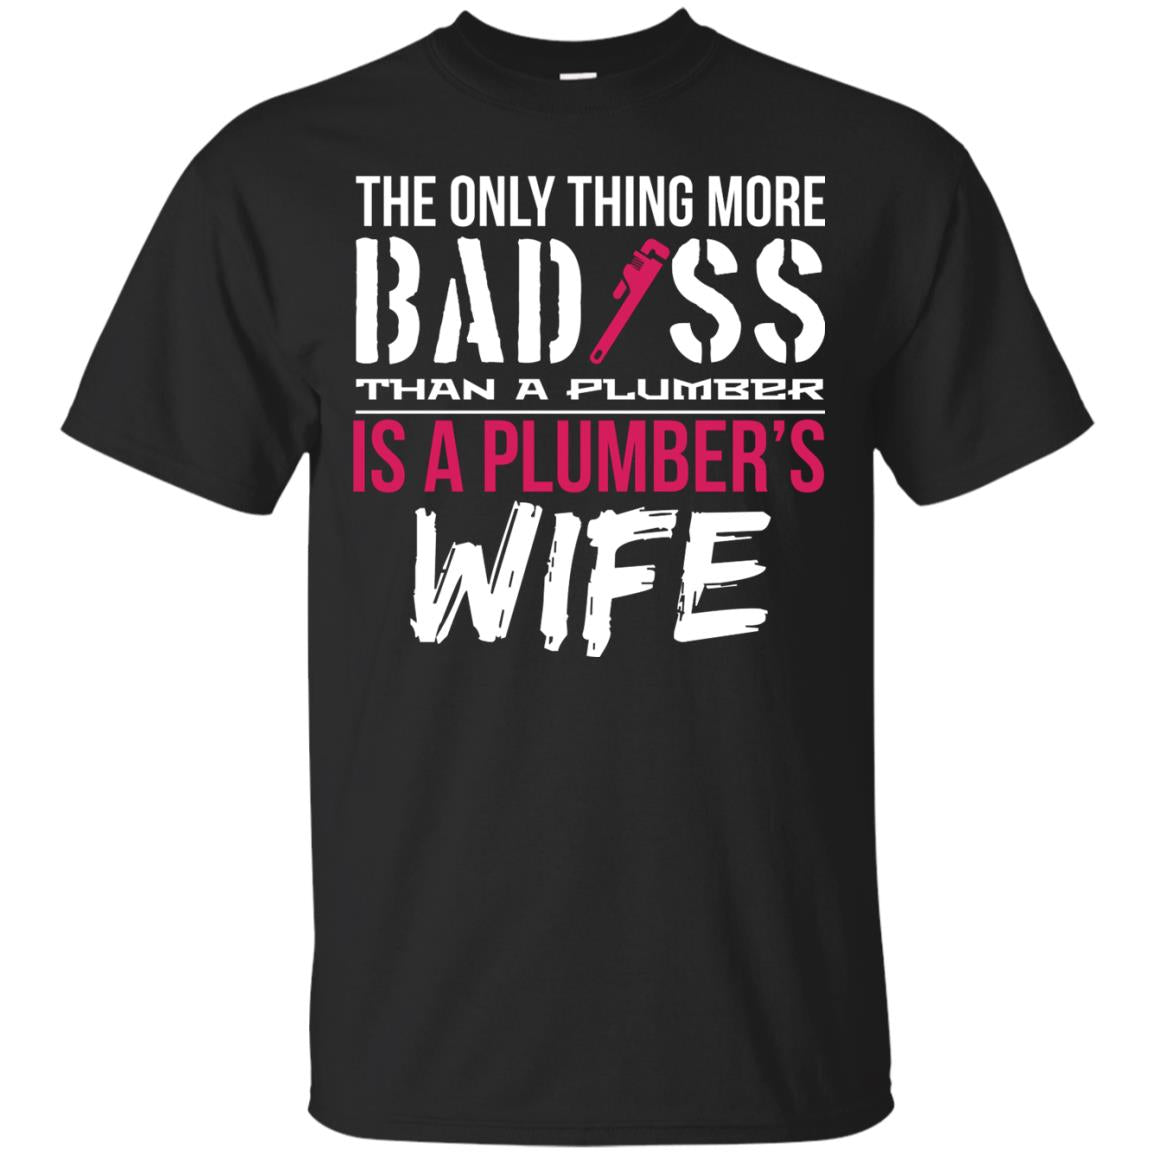 The Only Plumber's Wife - Apparel